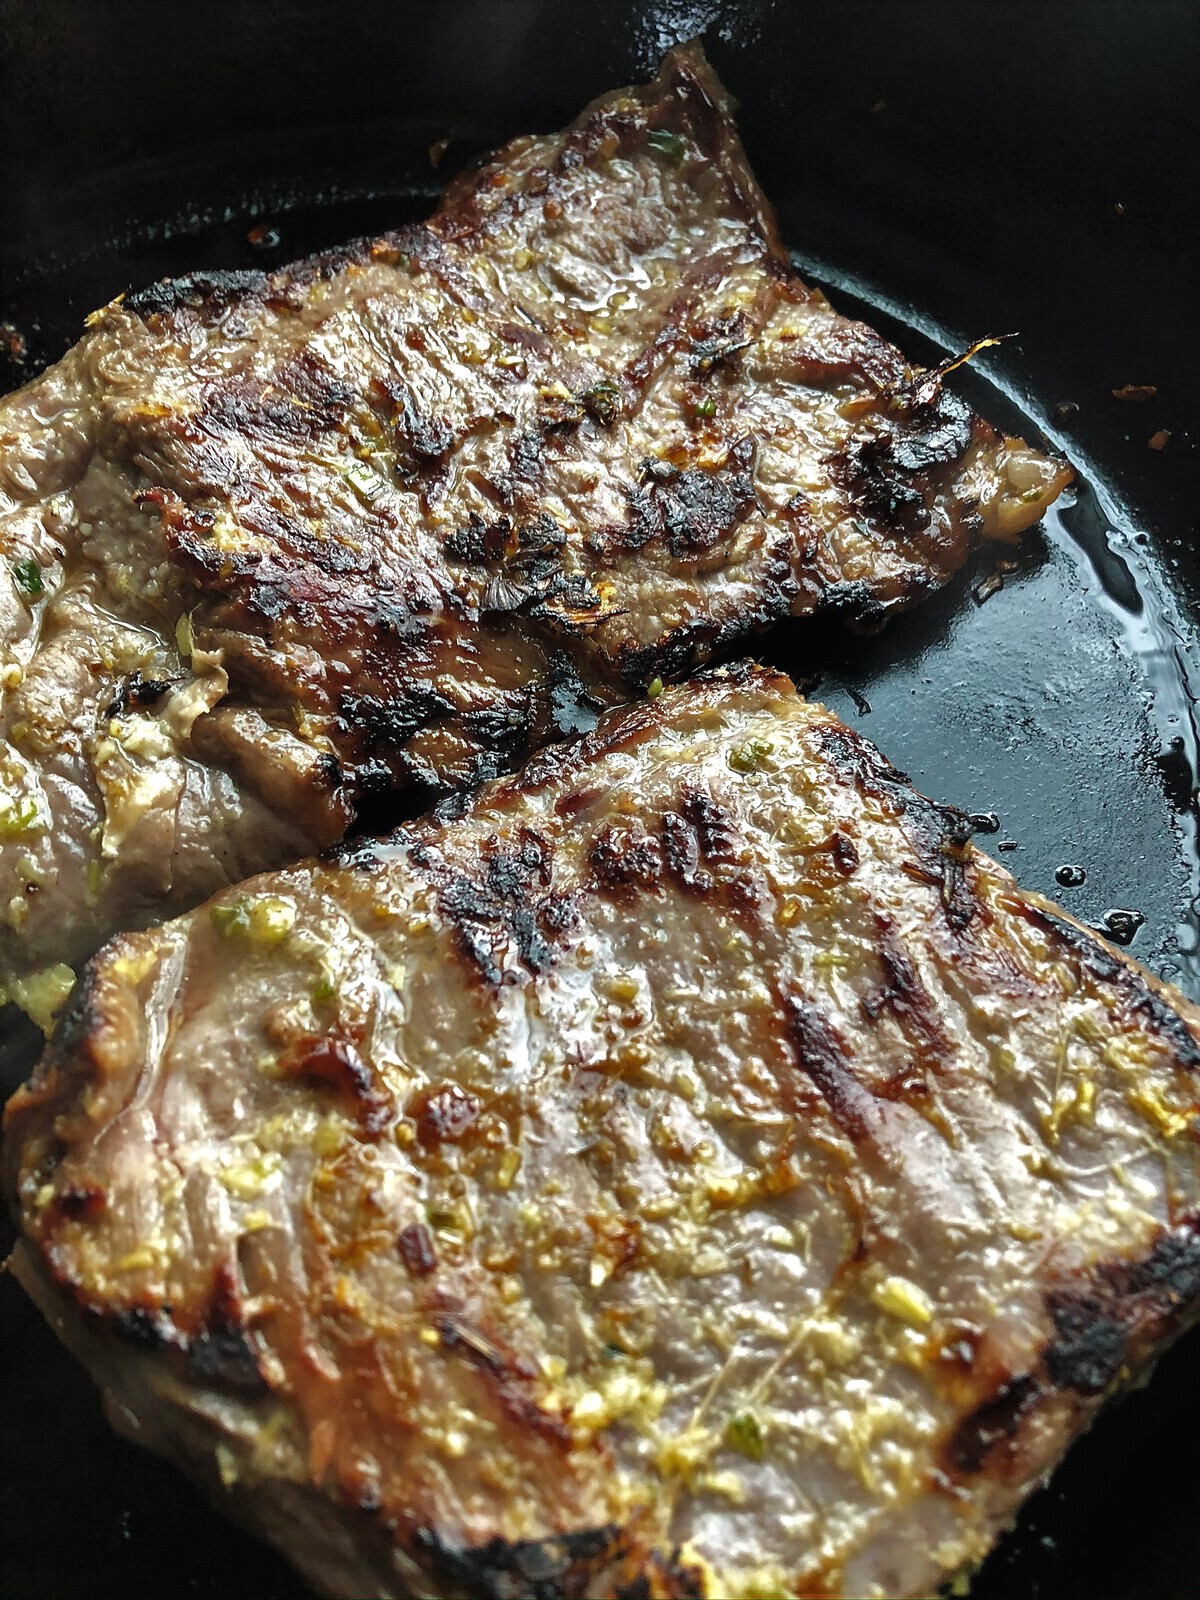 Searing steak in a cast iron skillet